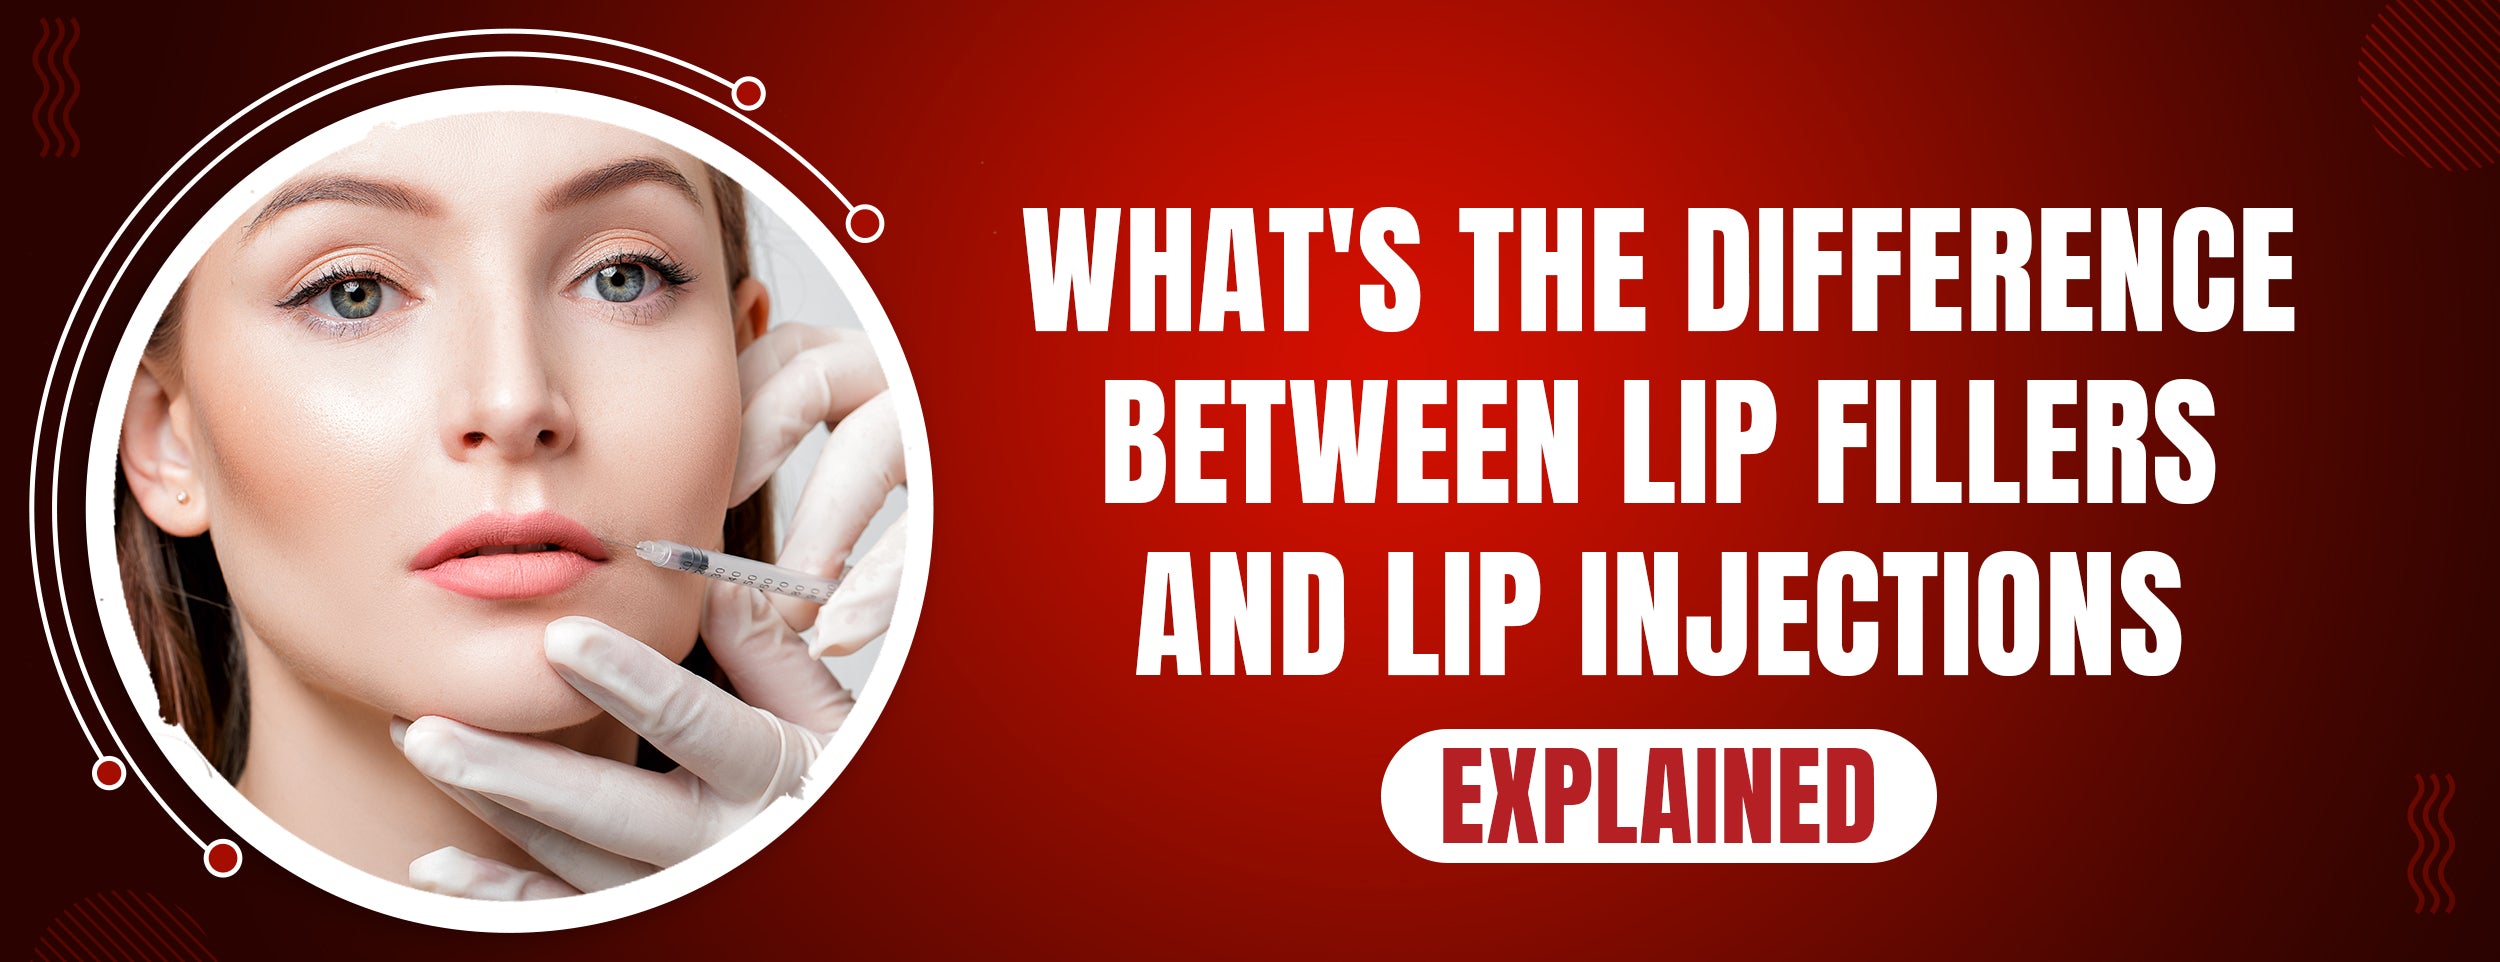  What's the difference between lip fillers and lip injections?